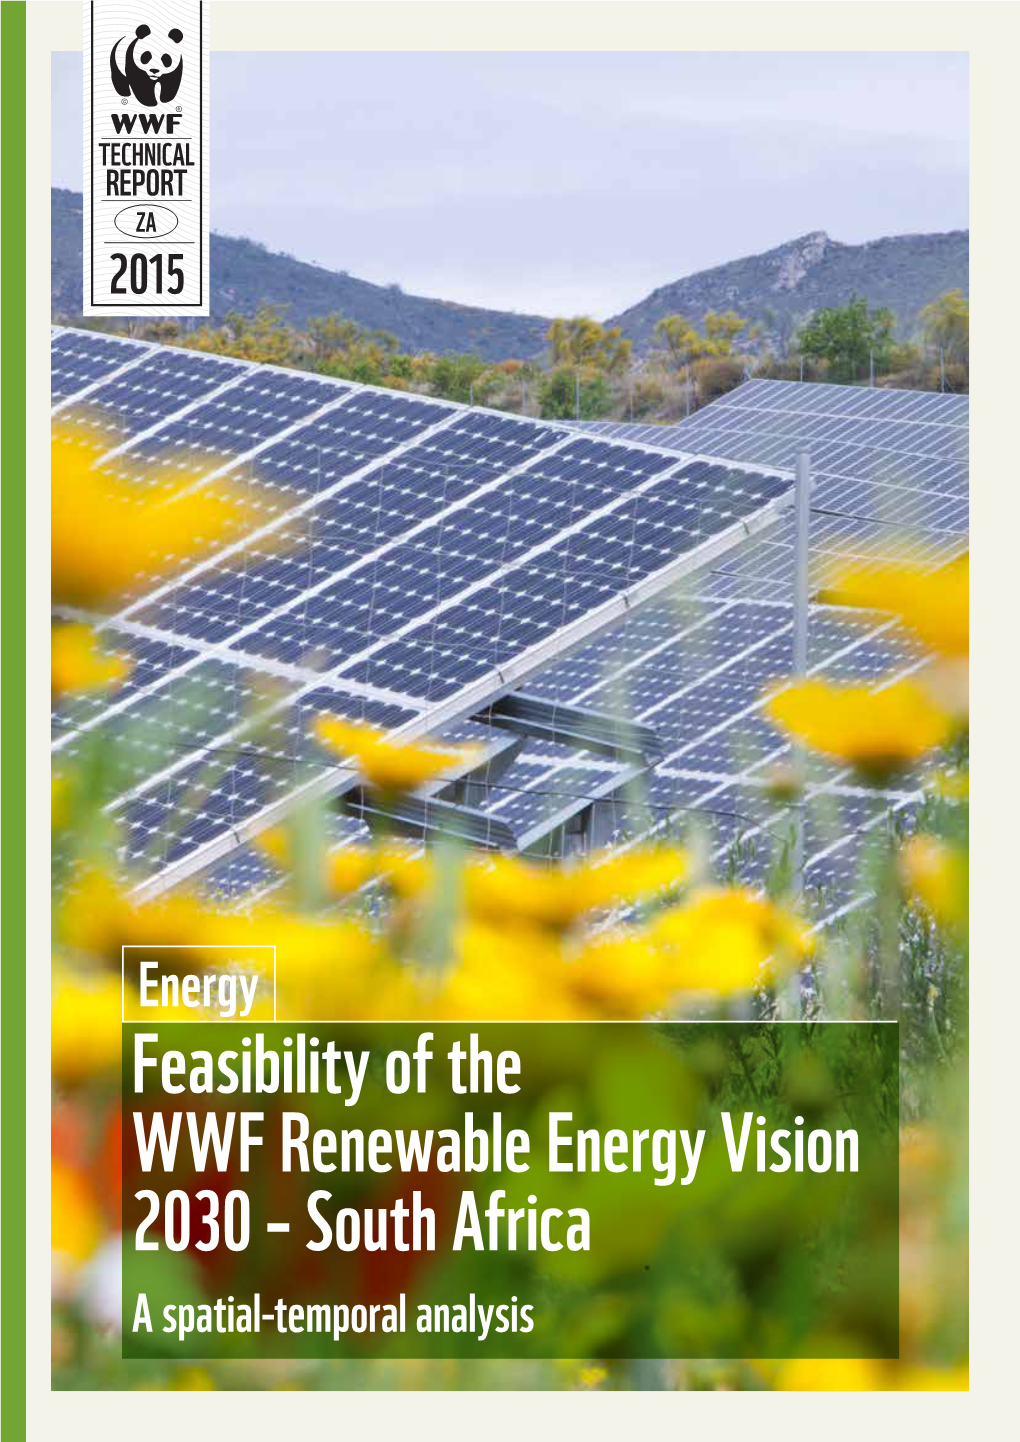 Feasibility of the WWF Renewable Energy Vision 2030 – South Africa a Spatial-Temporal Analysis CONTENTS